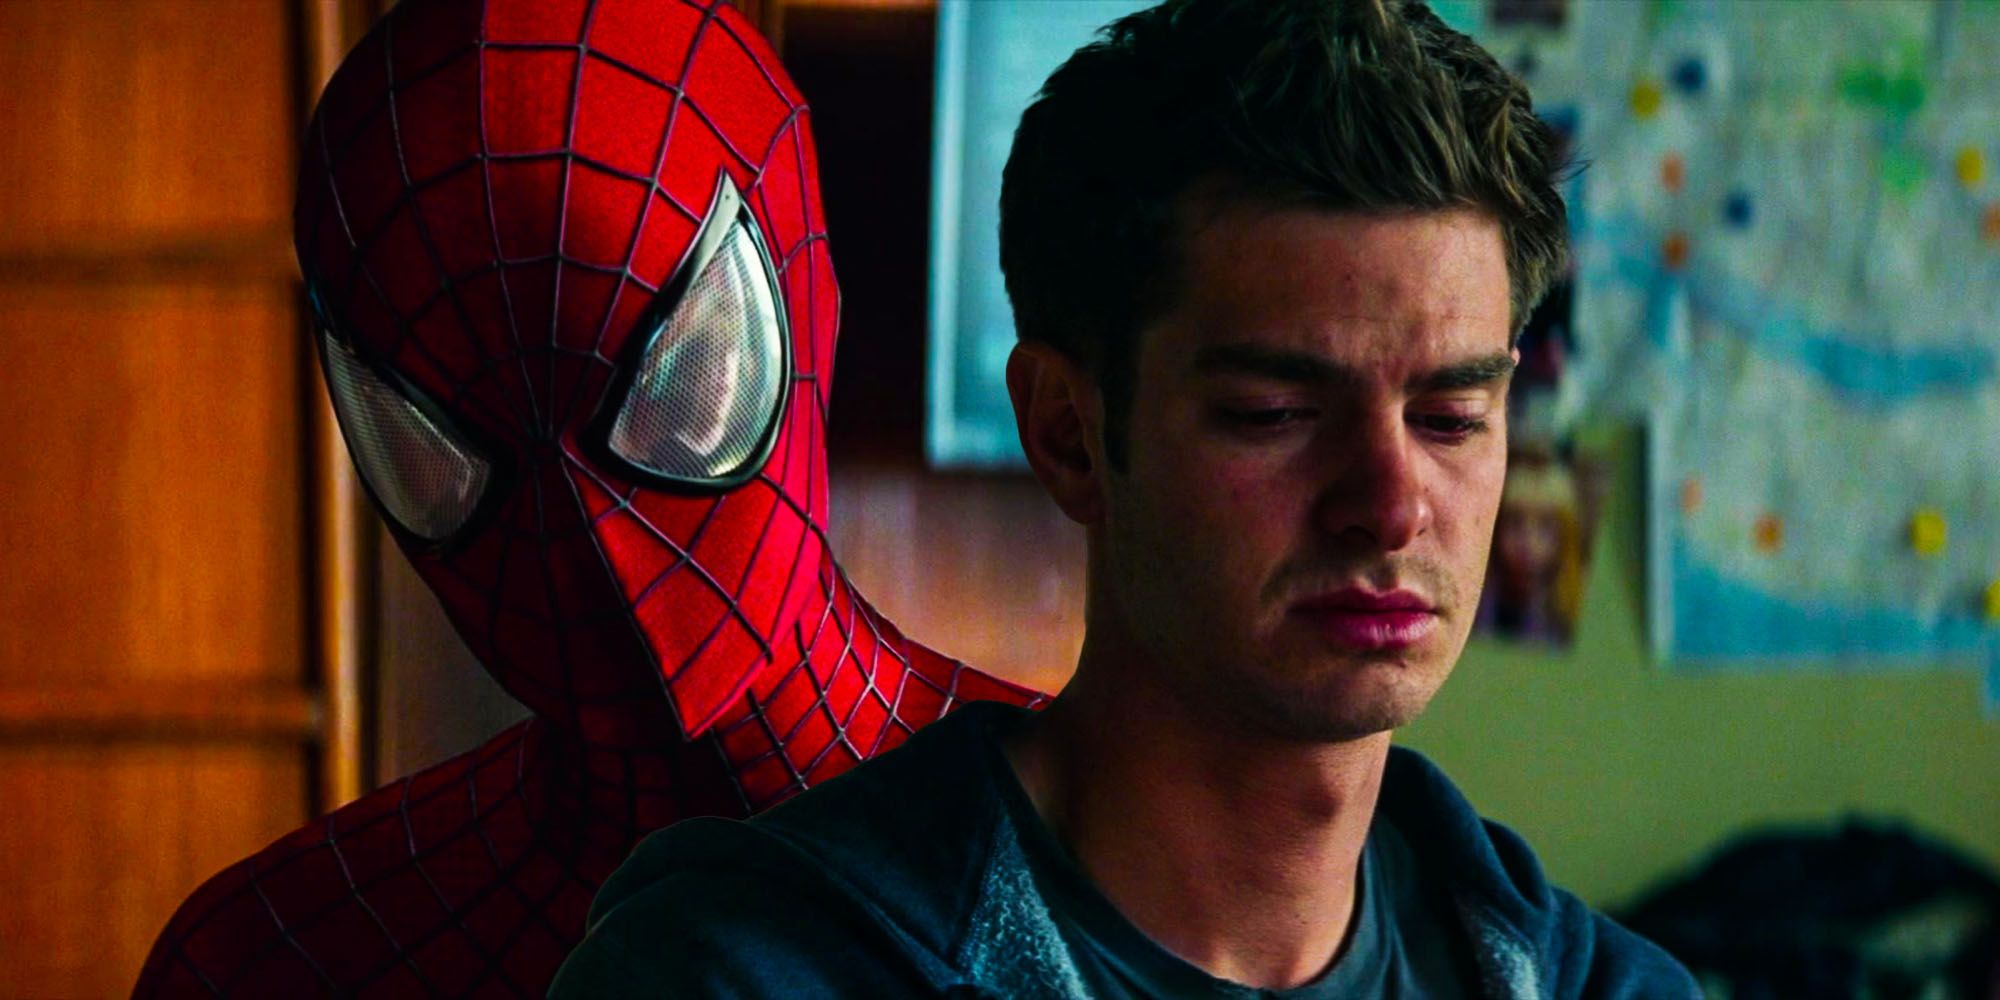 Why the amazing spiderman 3 was cancelled